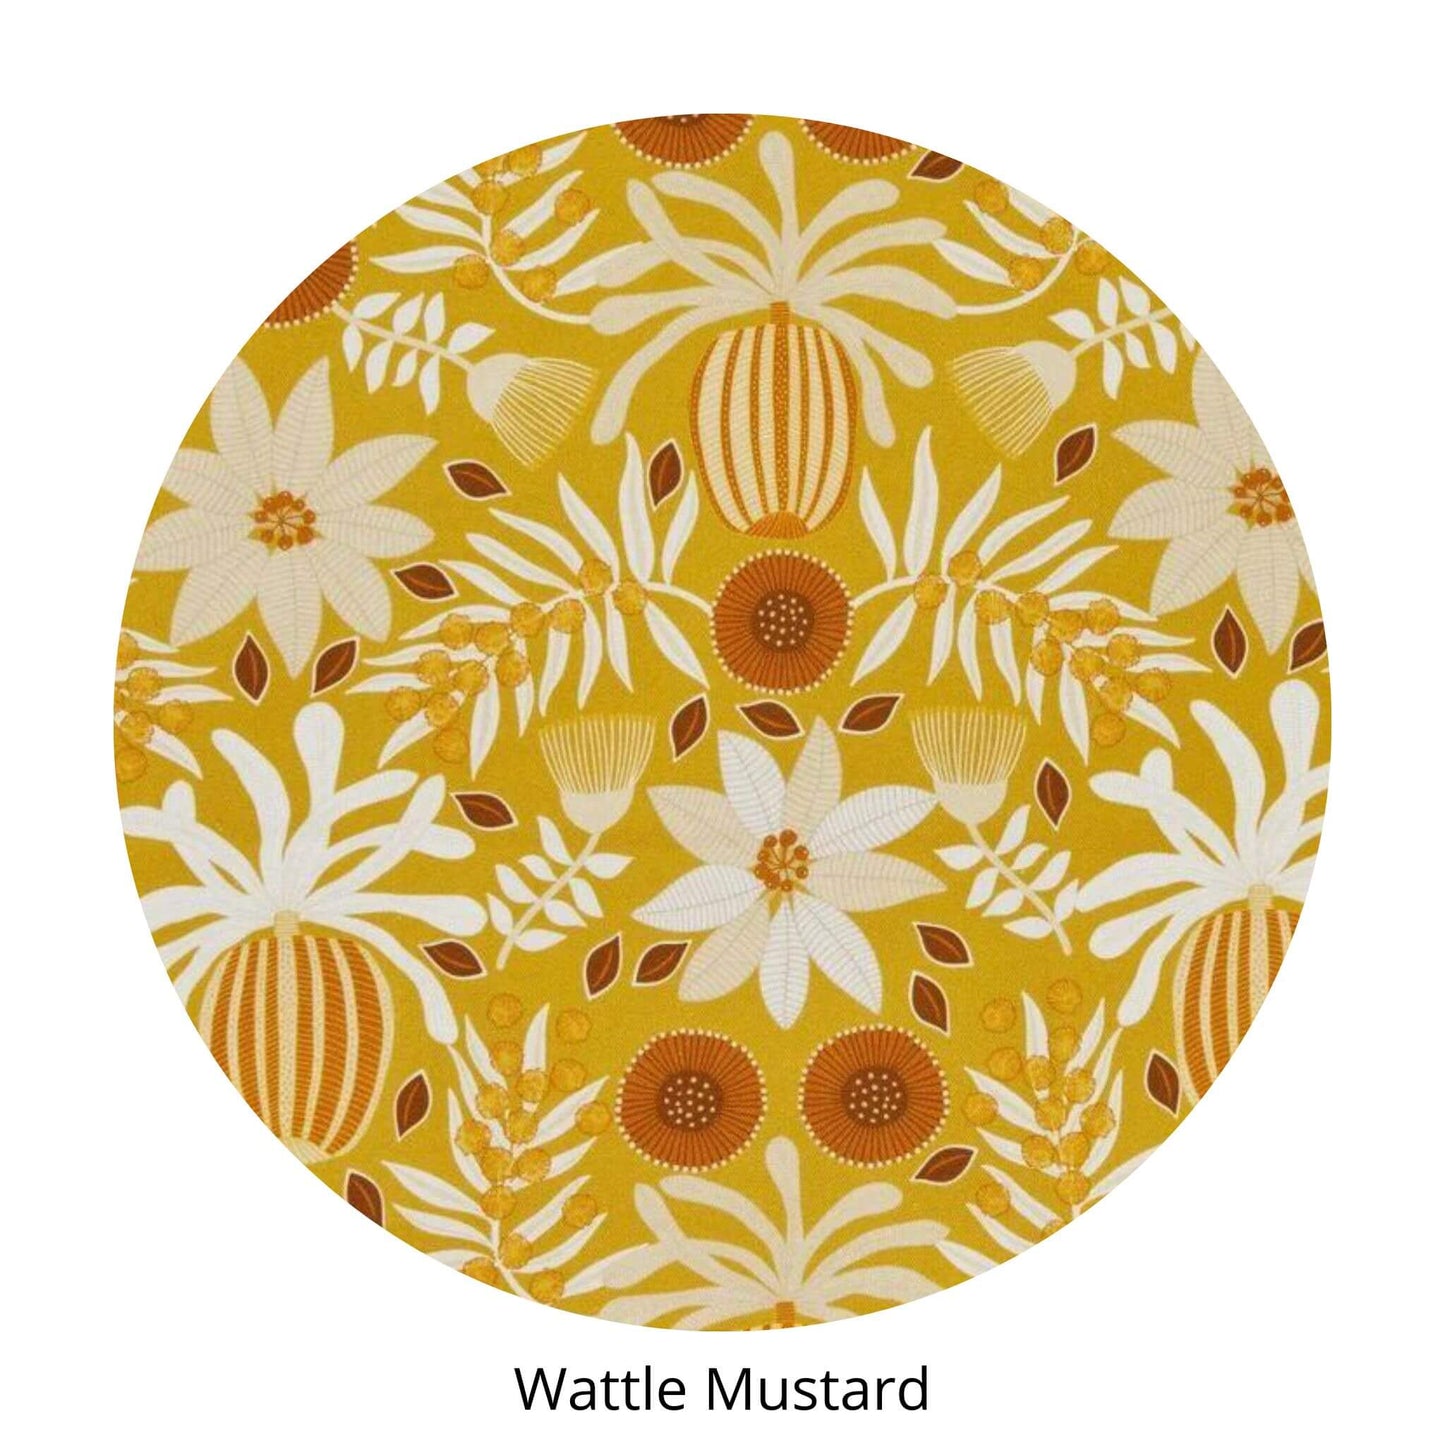 Load image into Gallery viewer, bek+ eula wheat bag heat and cool packs - wattle mustard swatch
